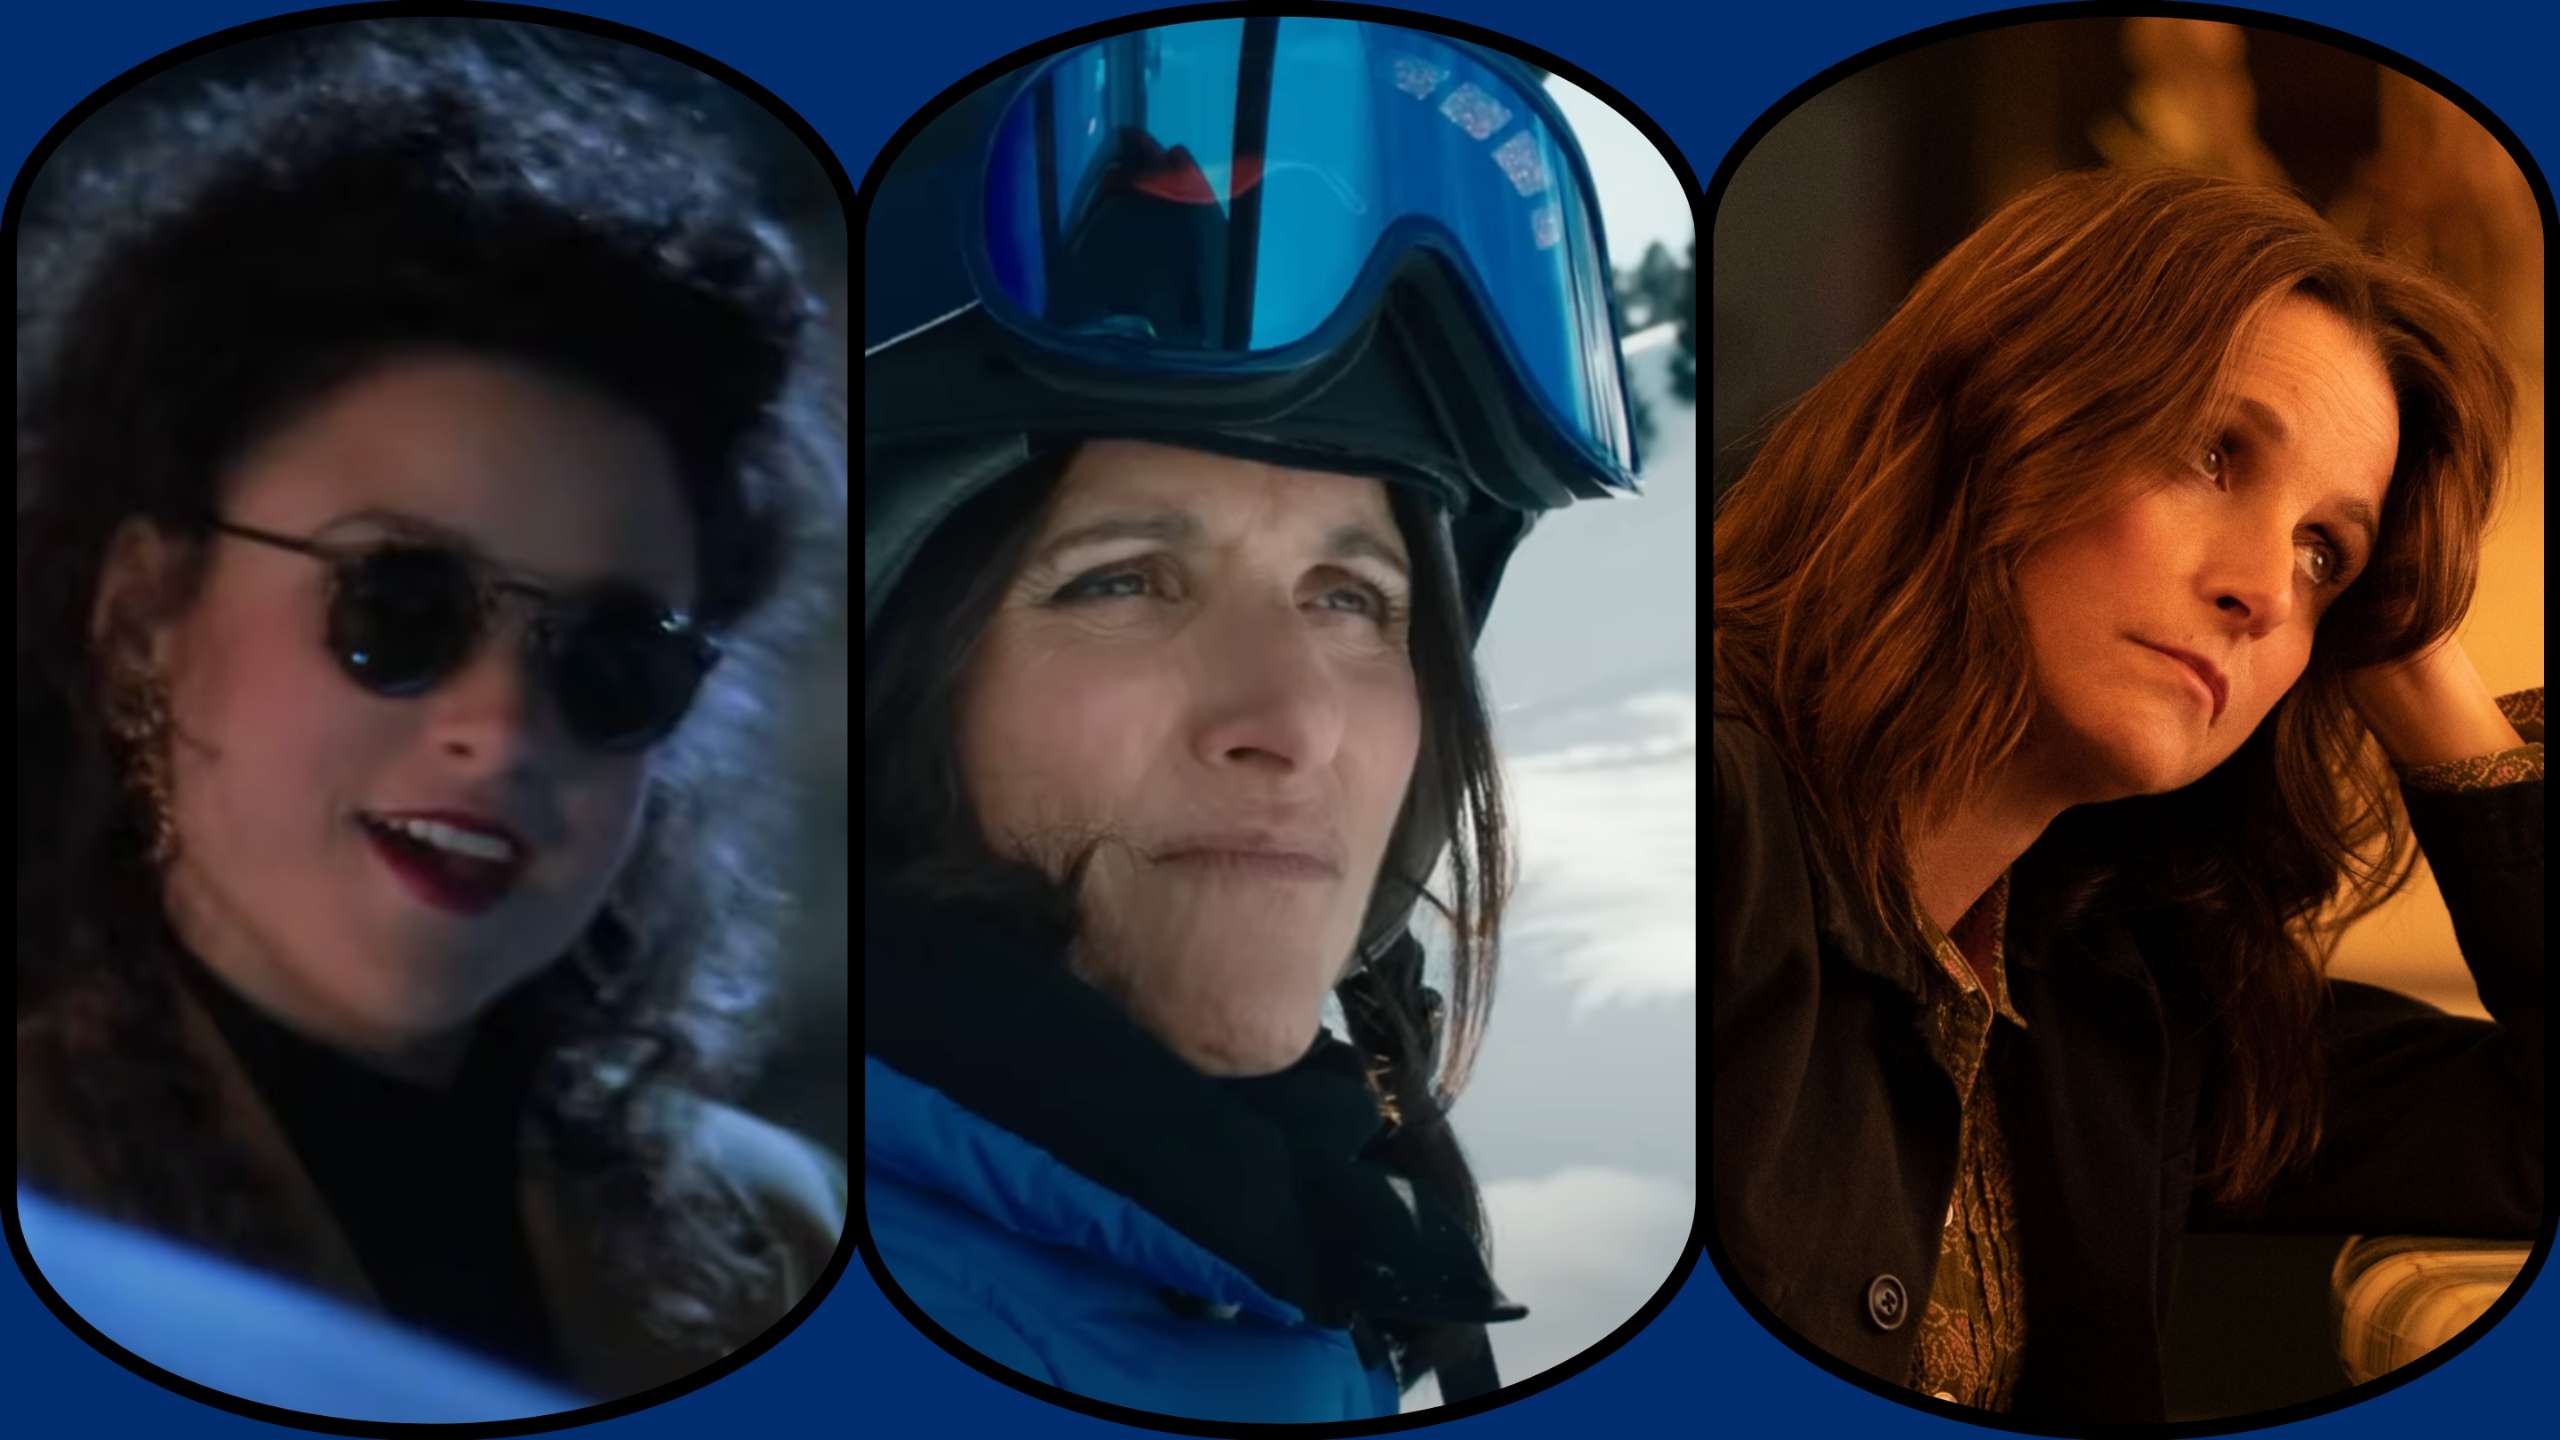 Only Nicole Holofcener has cracked the code on Julia Louis-Dreyfus movies